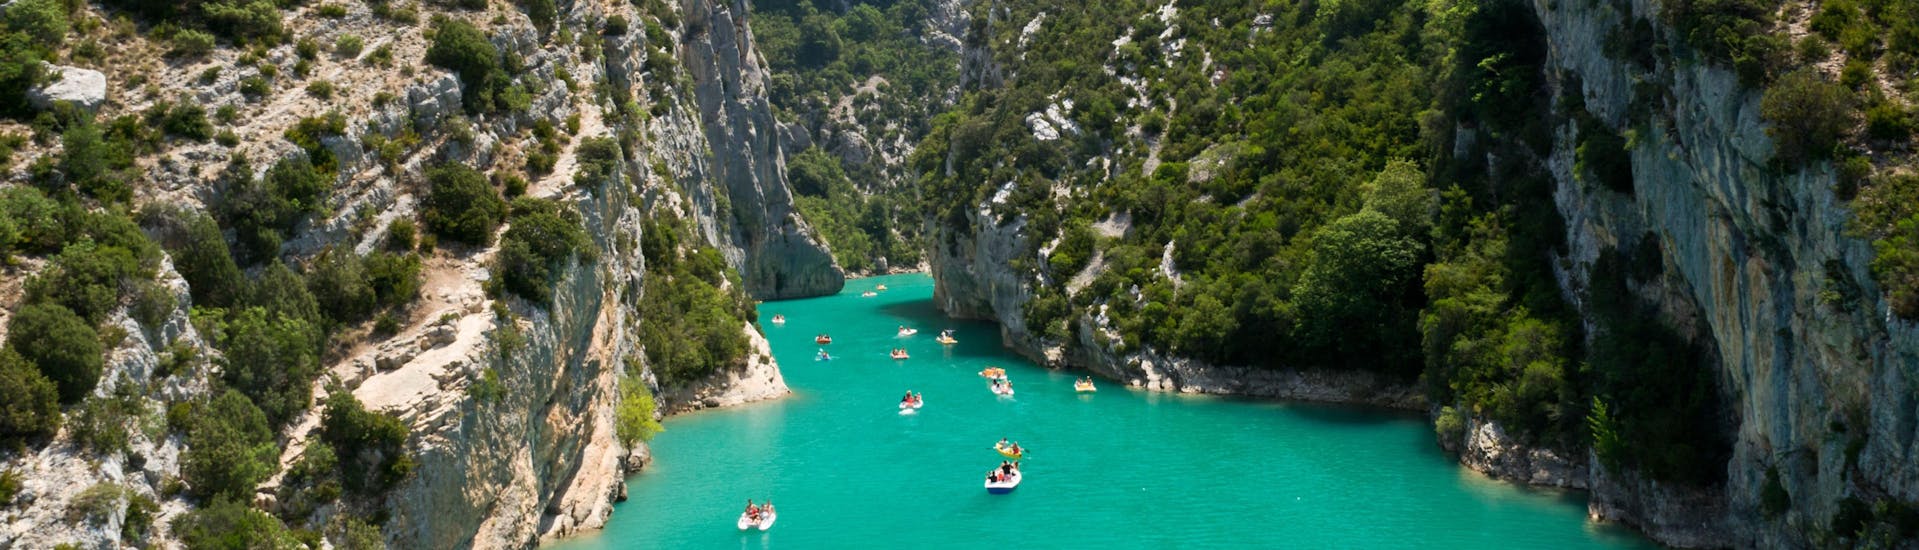 An image of the spectacular entrance to the famous gorge that attracts many visitors to go rafting in the Gorges du Verdon.